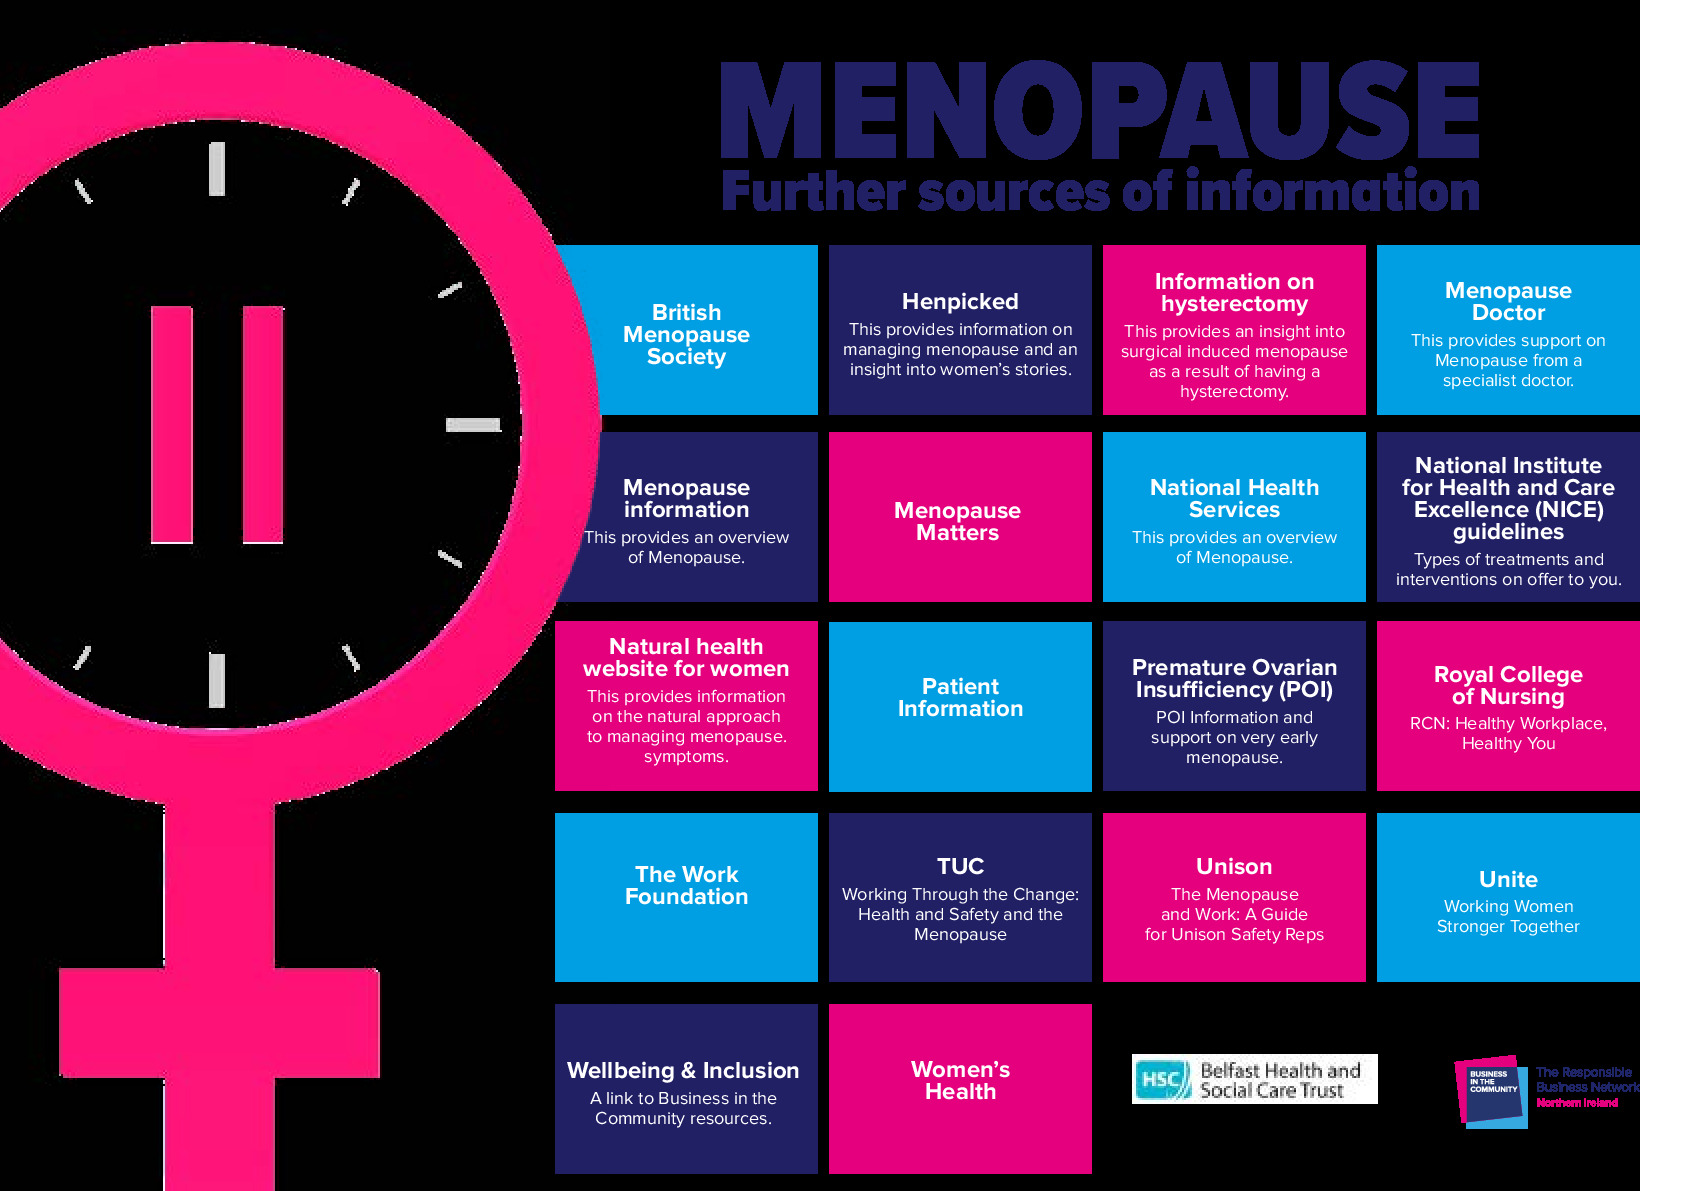 190214_Menopause_-further-sources-of-information.pdf